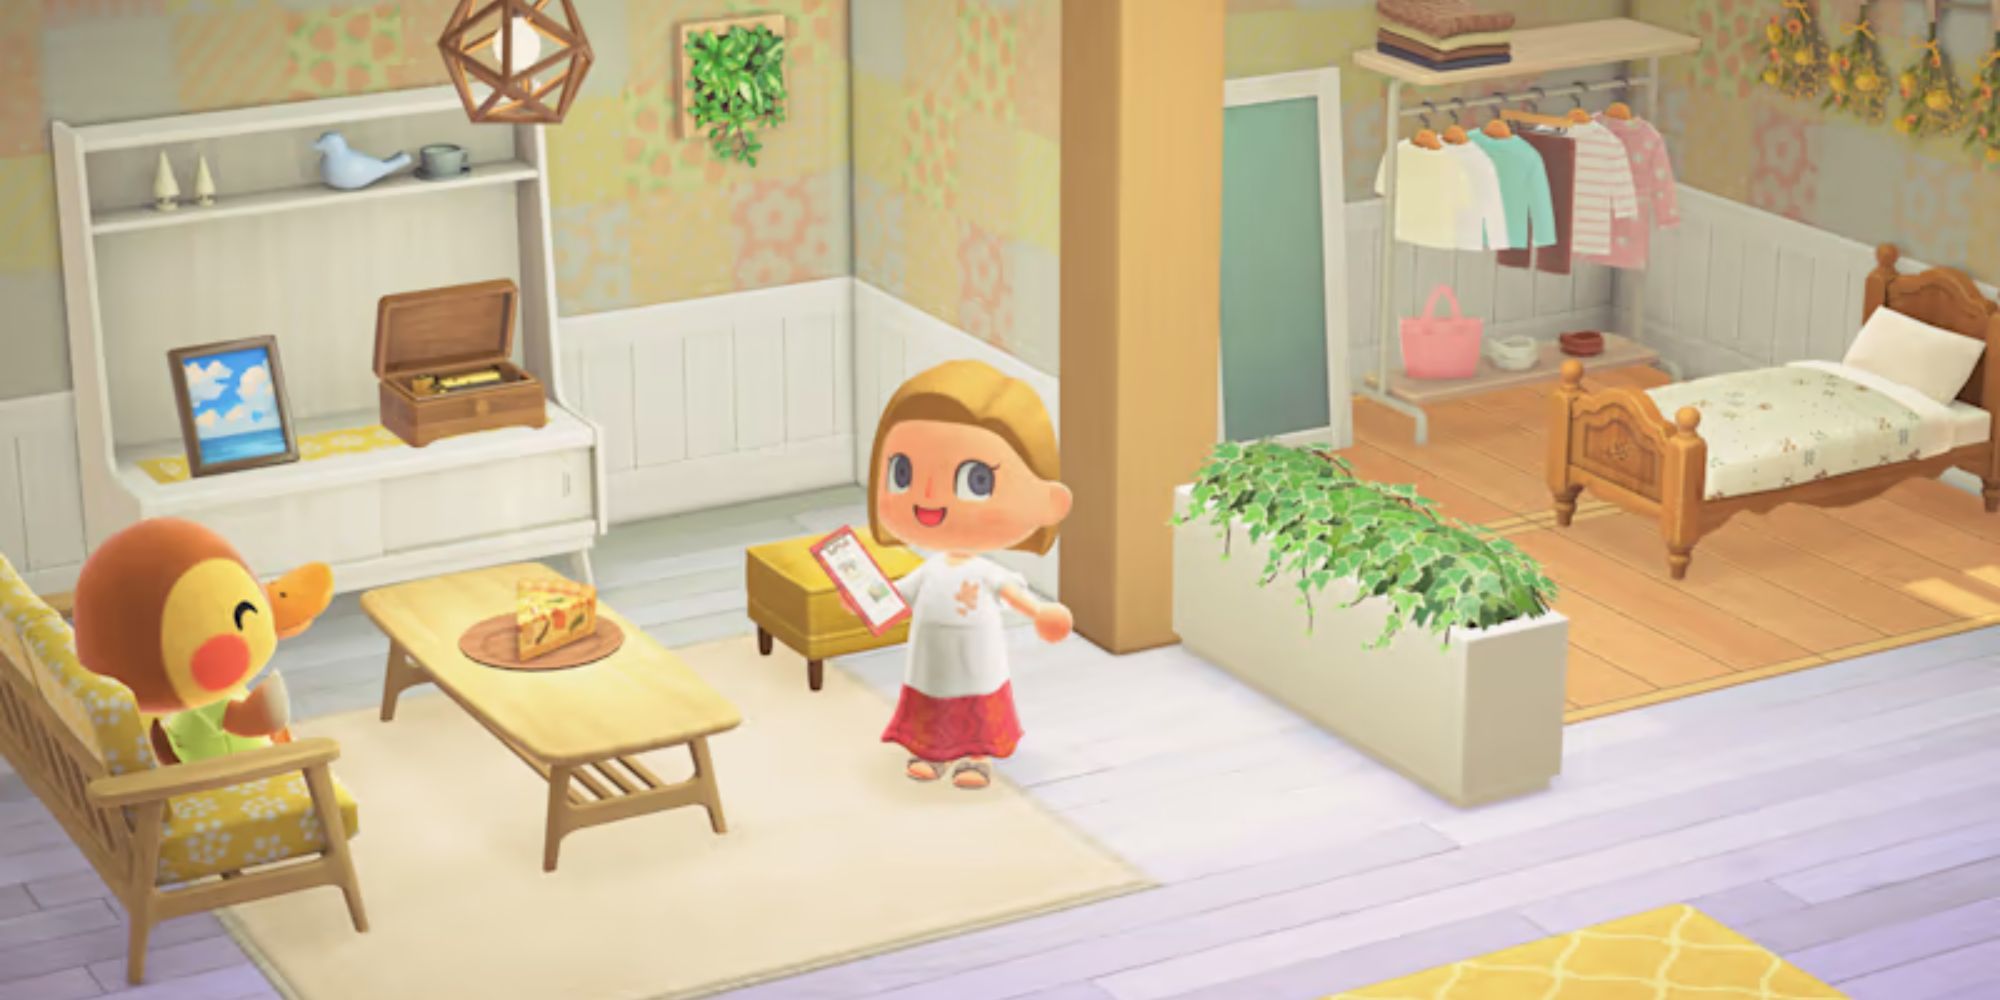 A Villager shows off a house to Molly